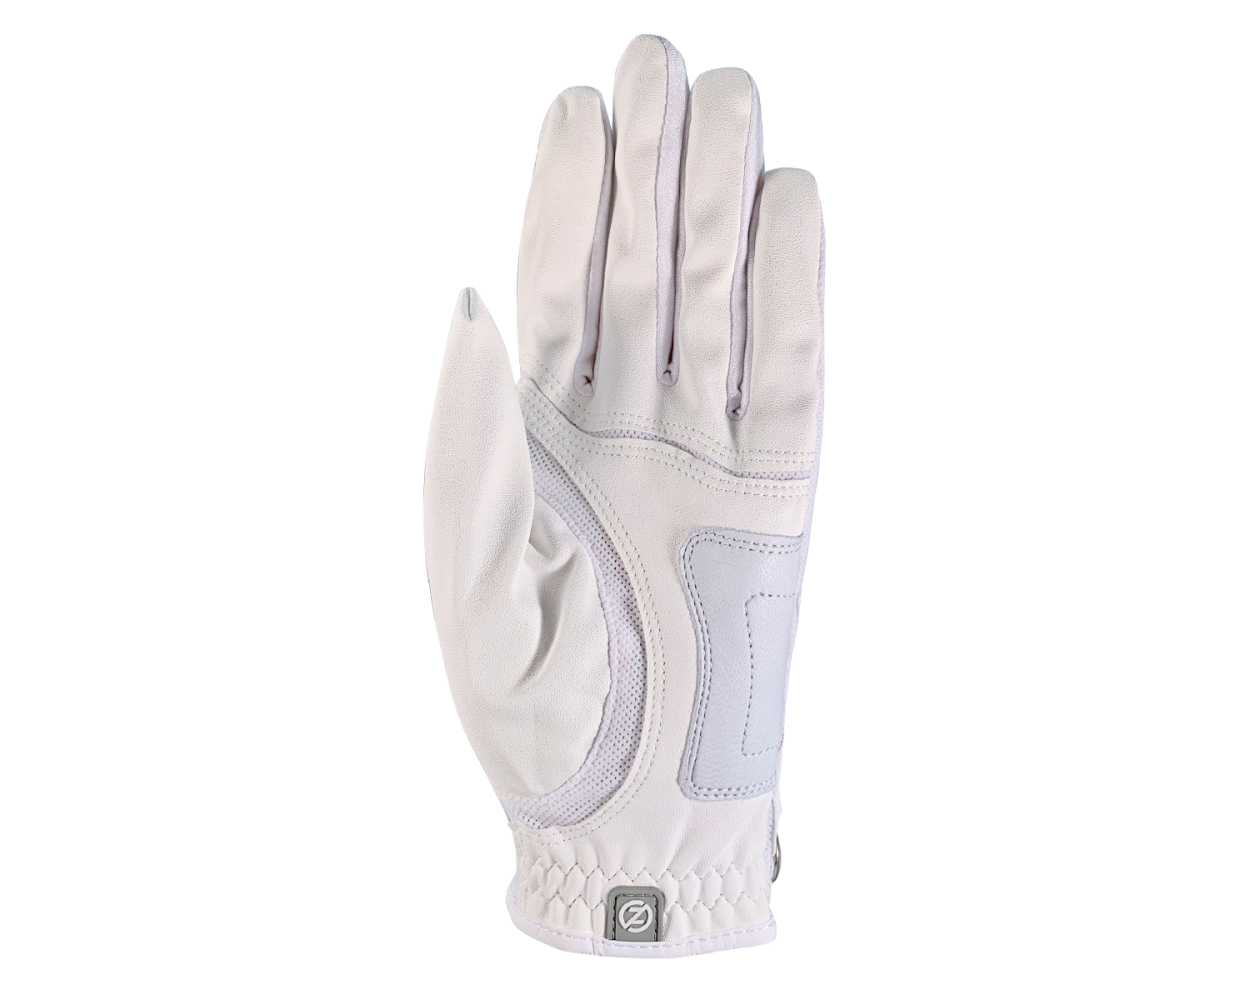 Zero Friction Women's Compression-Fit Synthetic Golf Glove - LH Universal Fit One Size